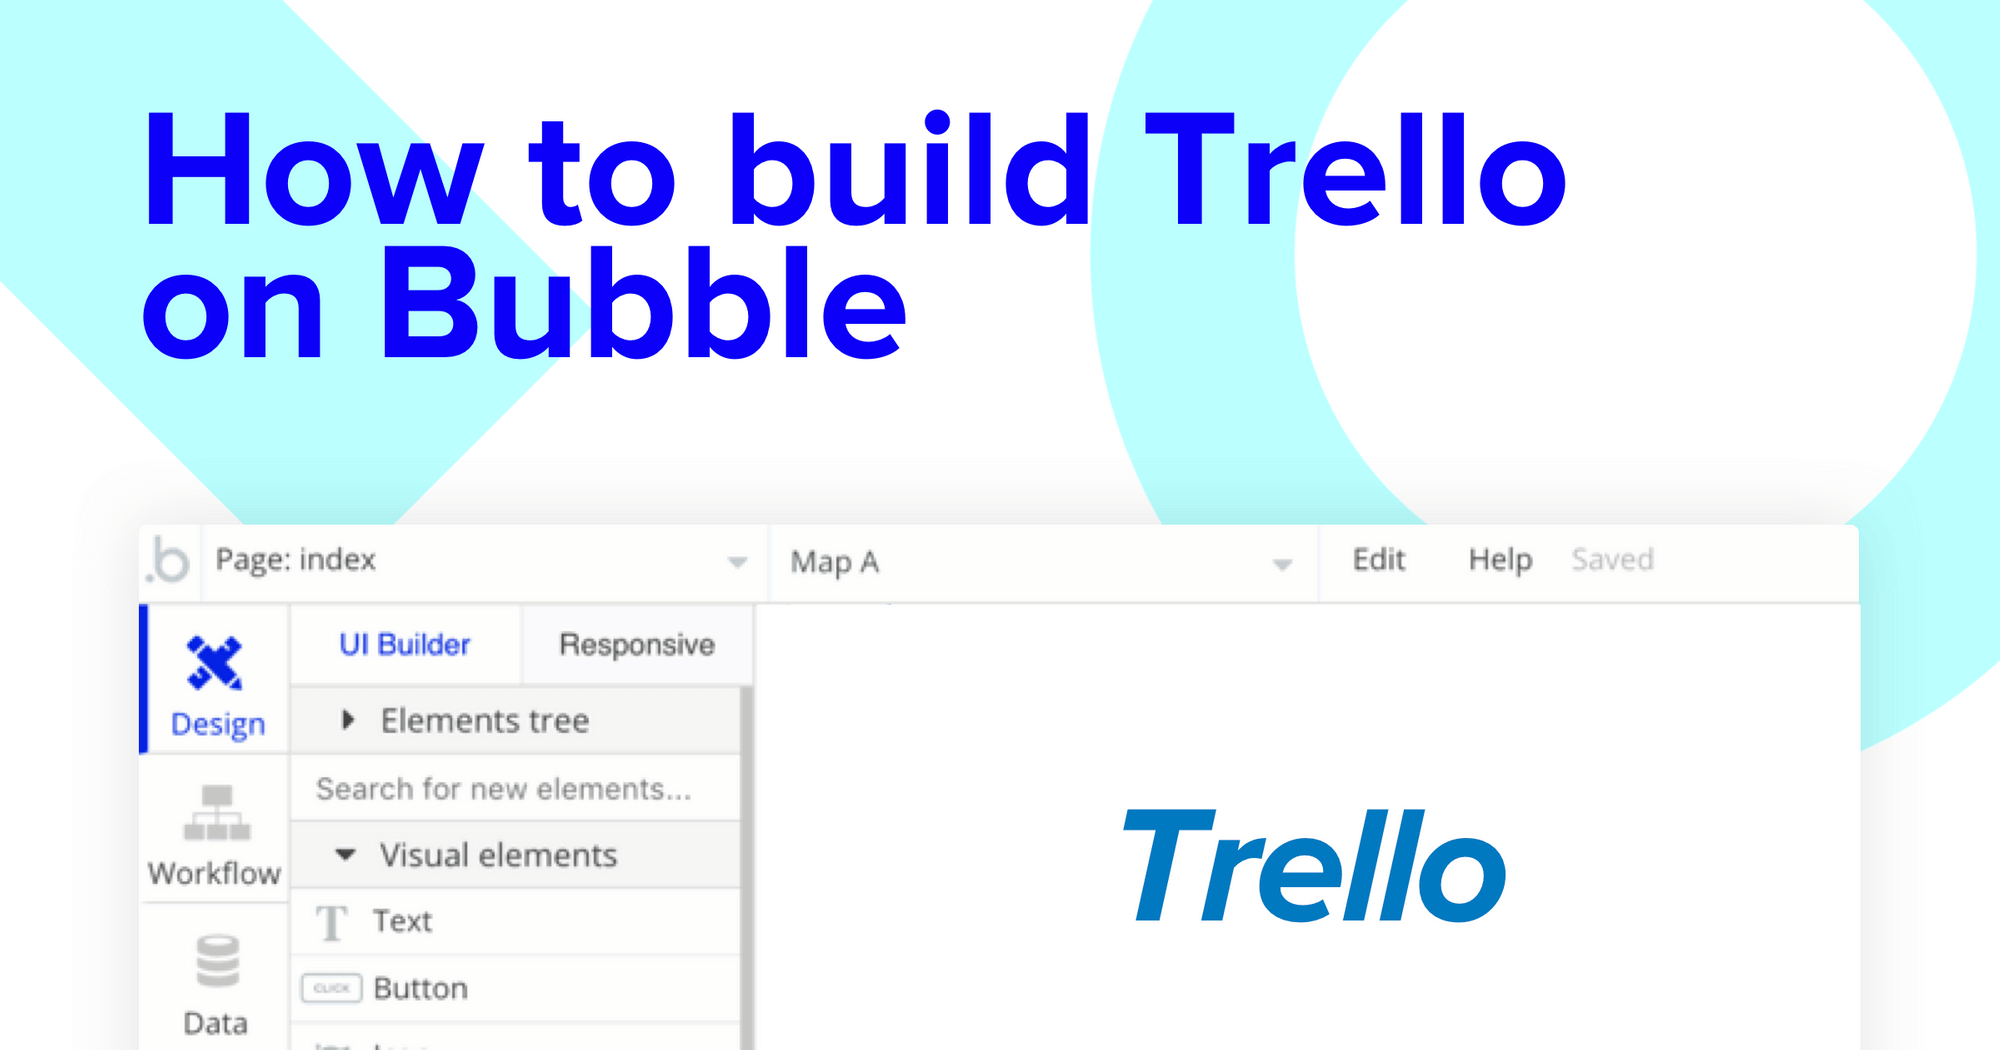 Trello gets an upgrade - New look and exclusive extra features